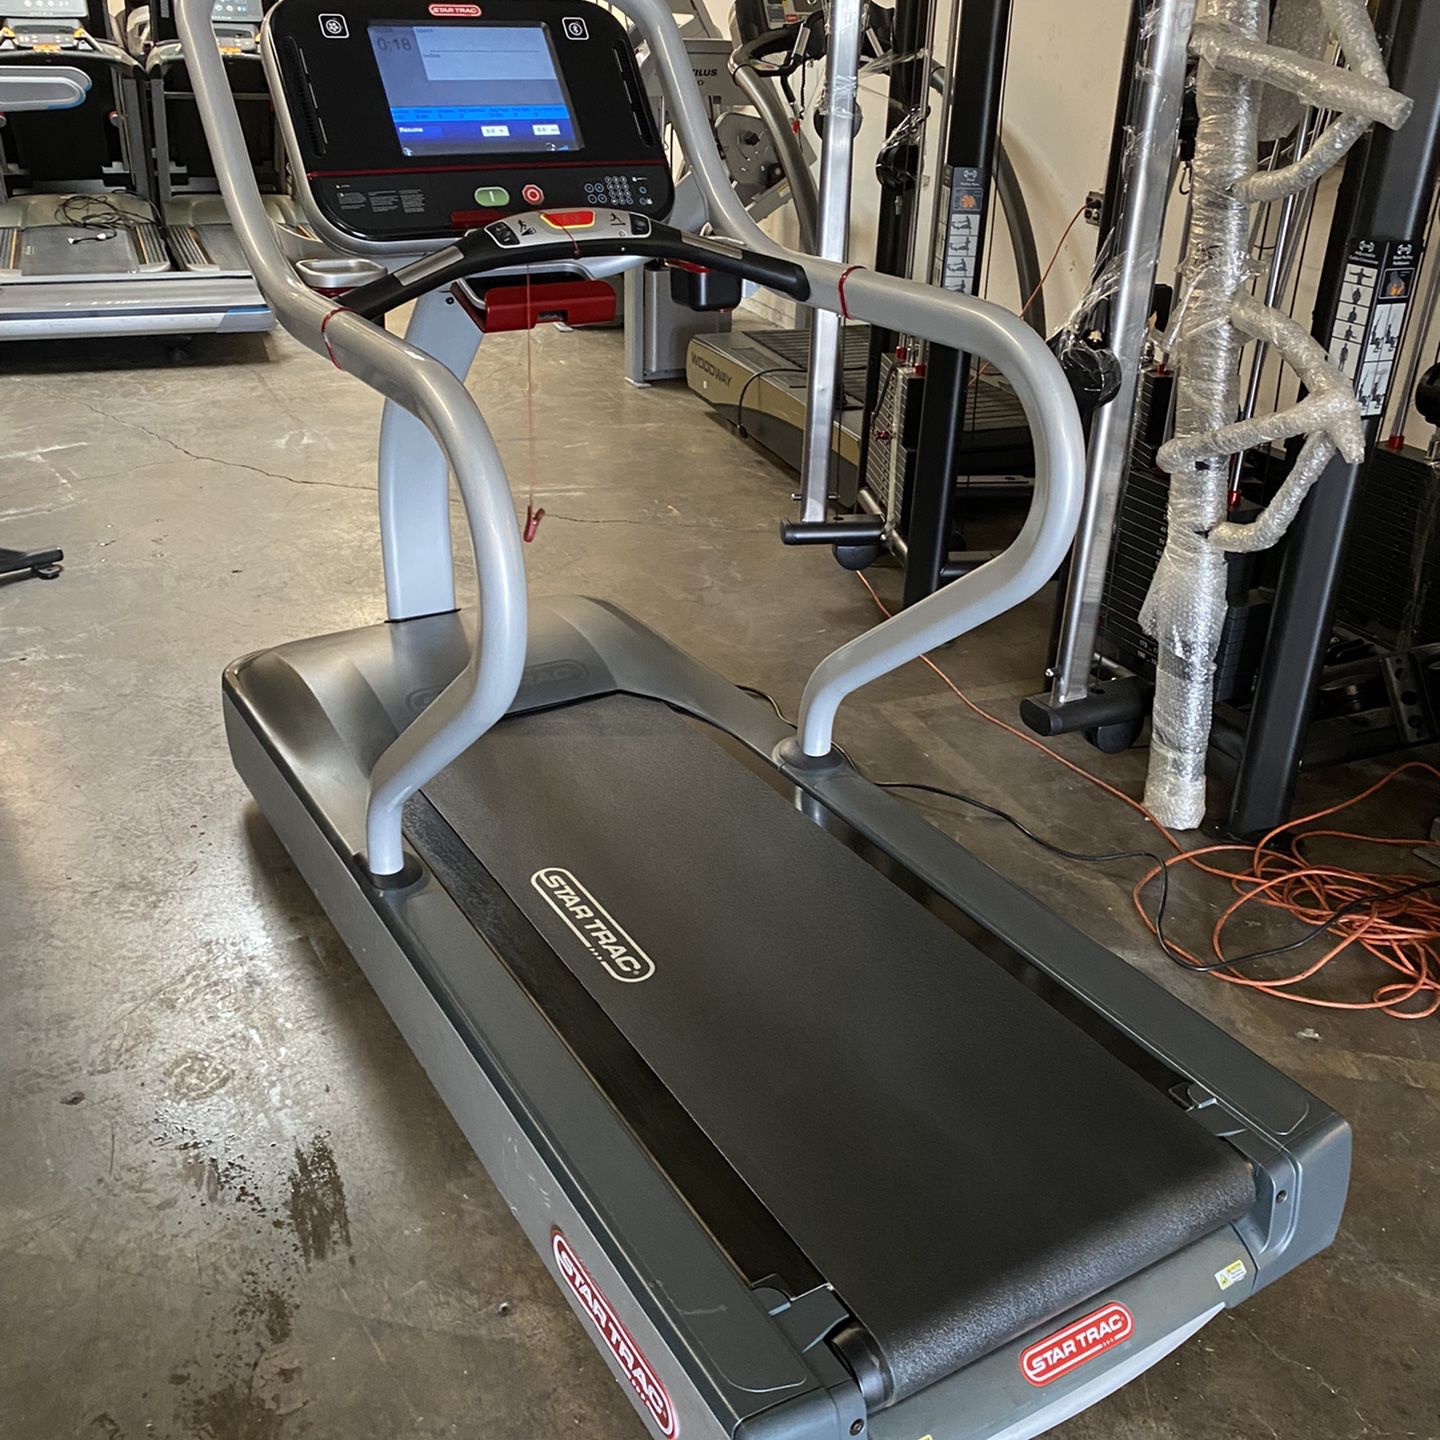 Star Trac Commercial Treadmill, Commercial Gym Equipment 